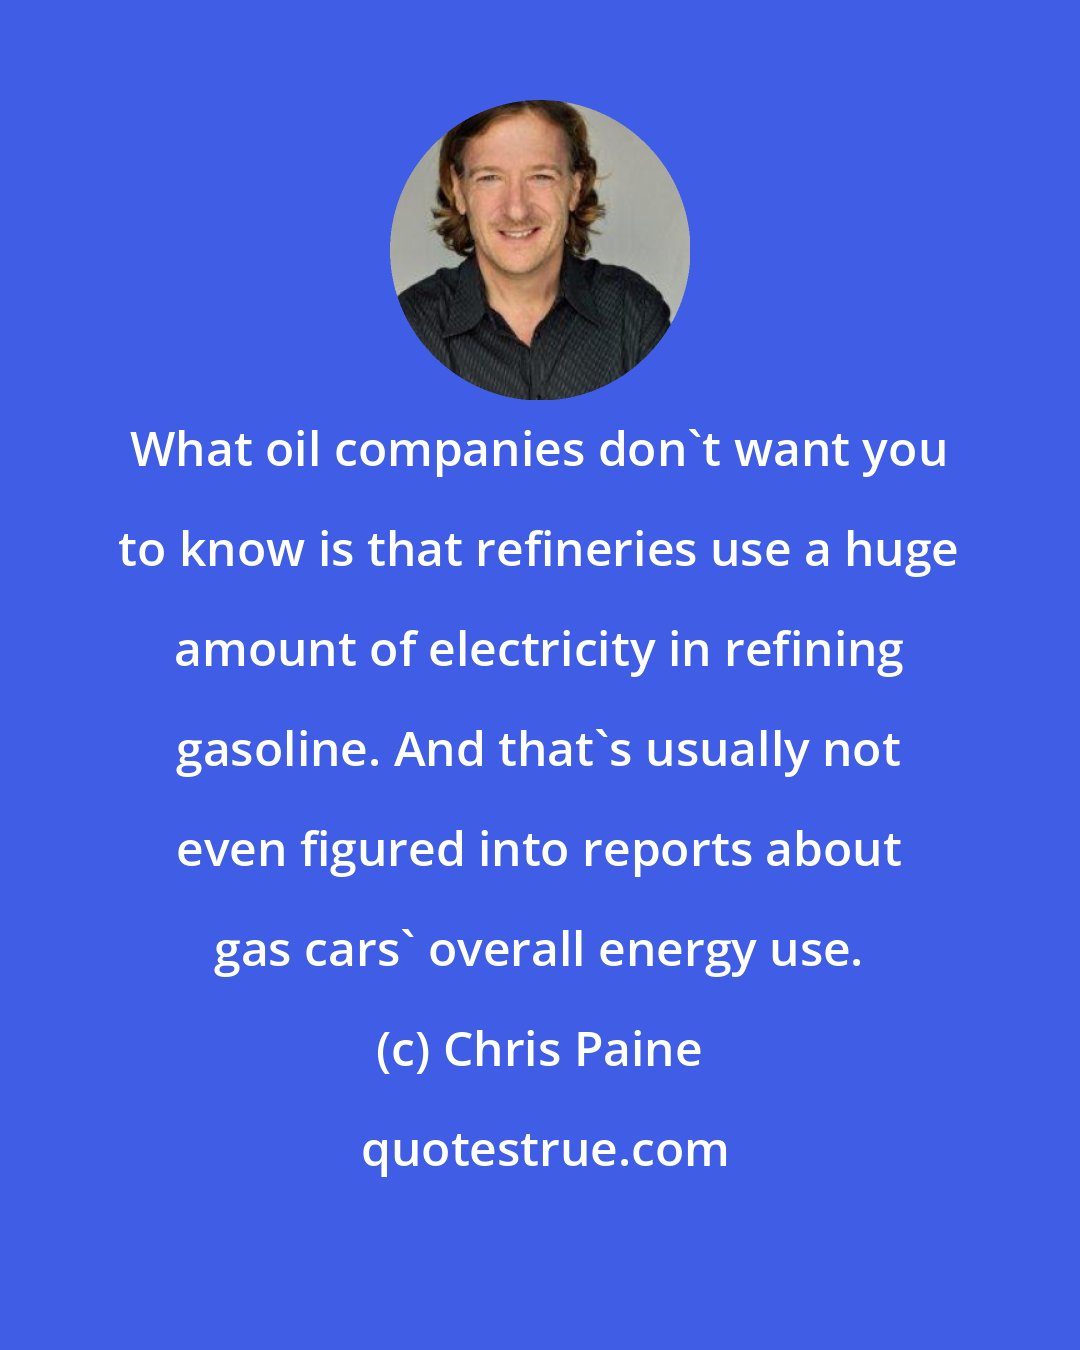 Chris Paine: What oil companies don't want you to know is that refineries use a huge amount of electricity in refining gasoline. And that's usually not even figured into reports about gas cars' overall energy use.